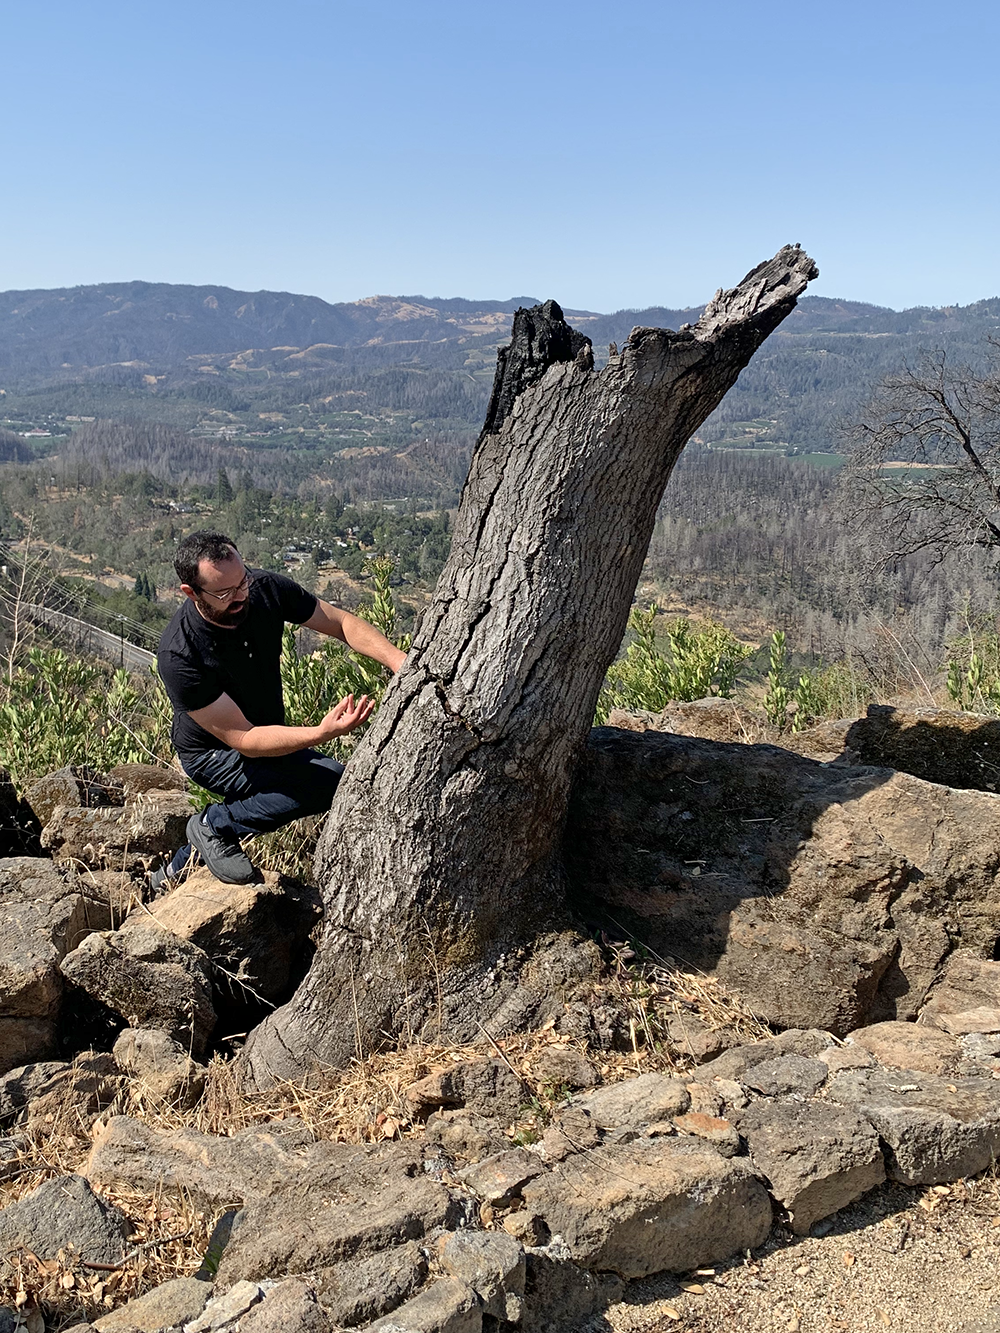  The burned-out tree before extraction sitting high above the Napa Valley in the Somnium vineyard. 